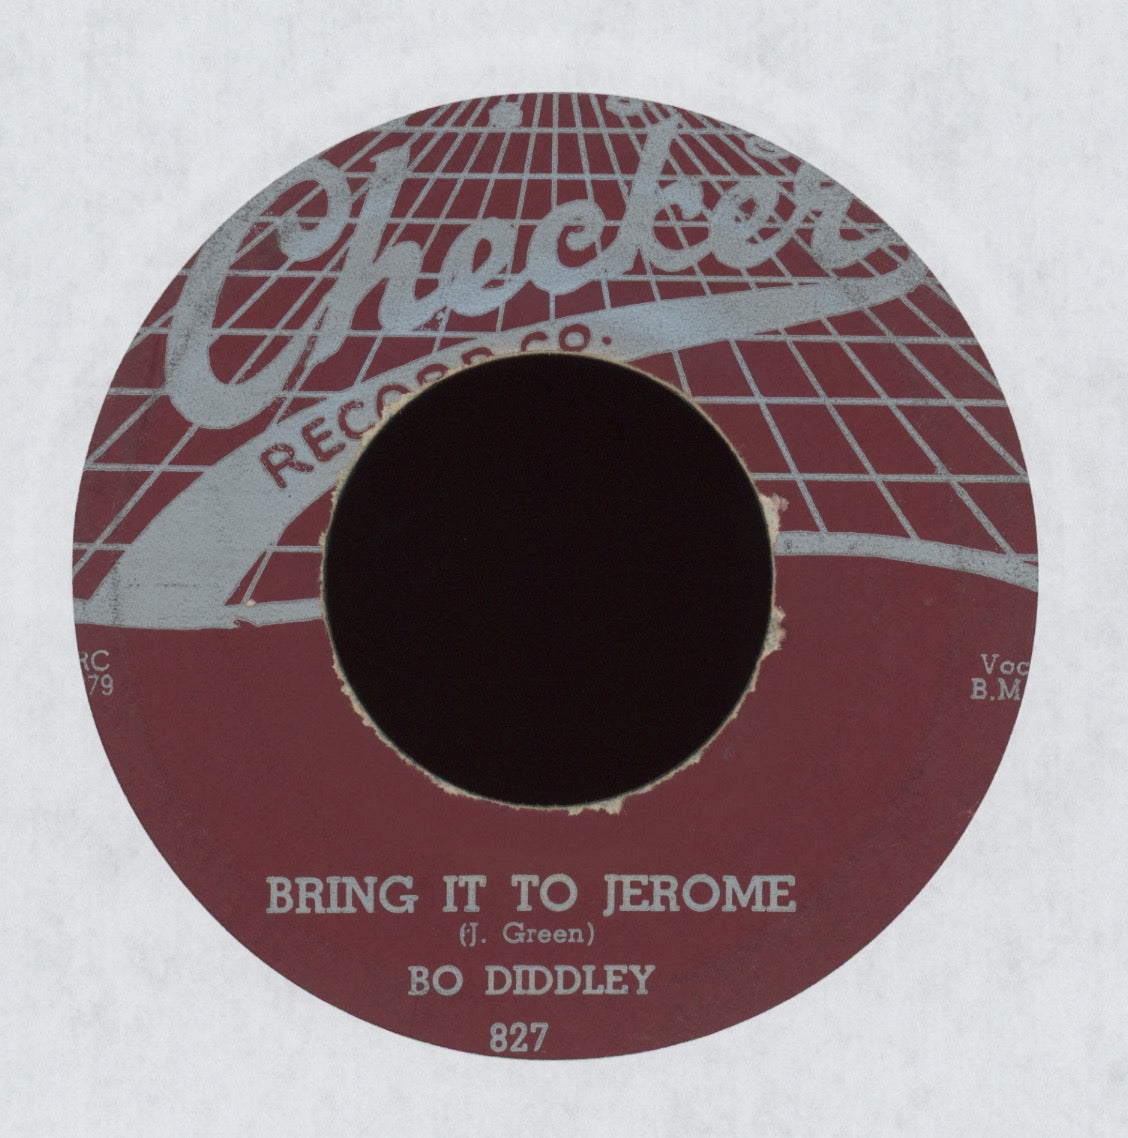 Bo Diddley - Bring It To Jerome on Checker